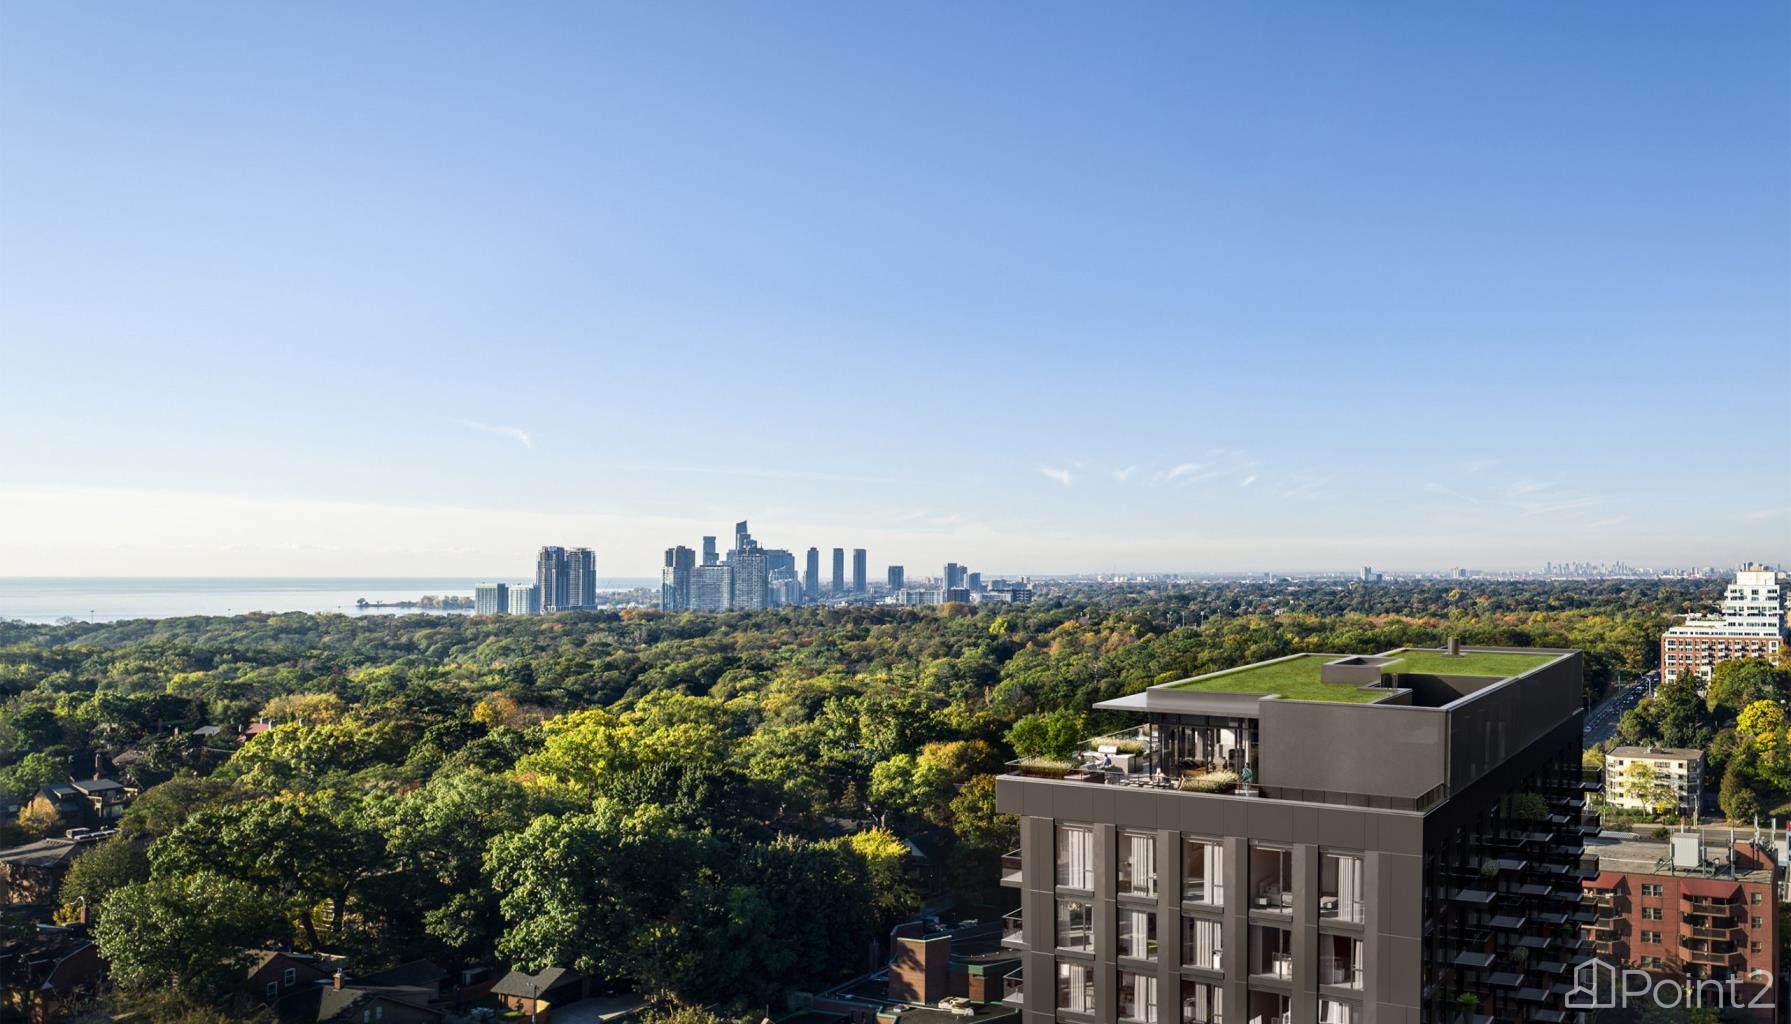 Westbend Residences Insider Vip Access At Bloor Keele, Toronto, ON M6P1A8 Photo 5